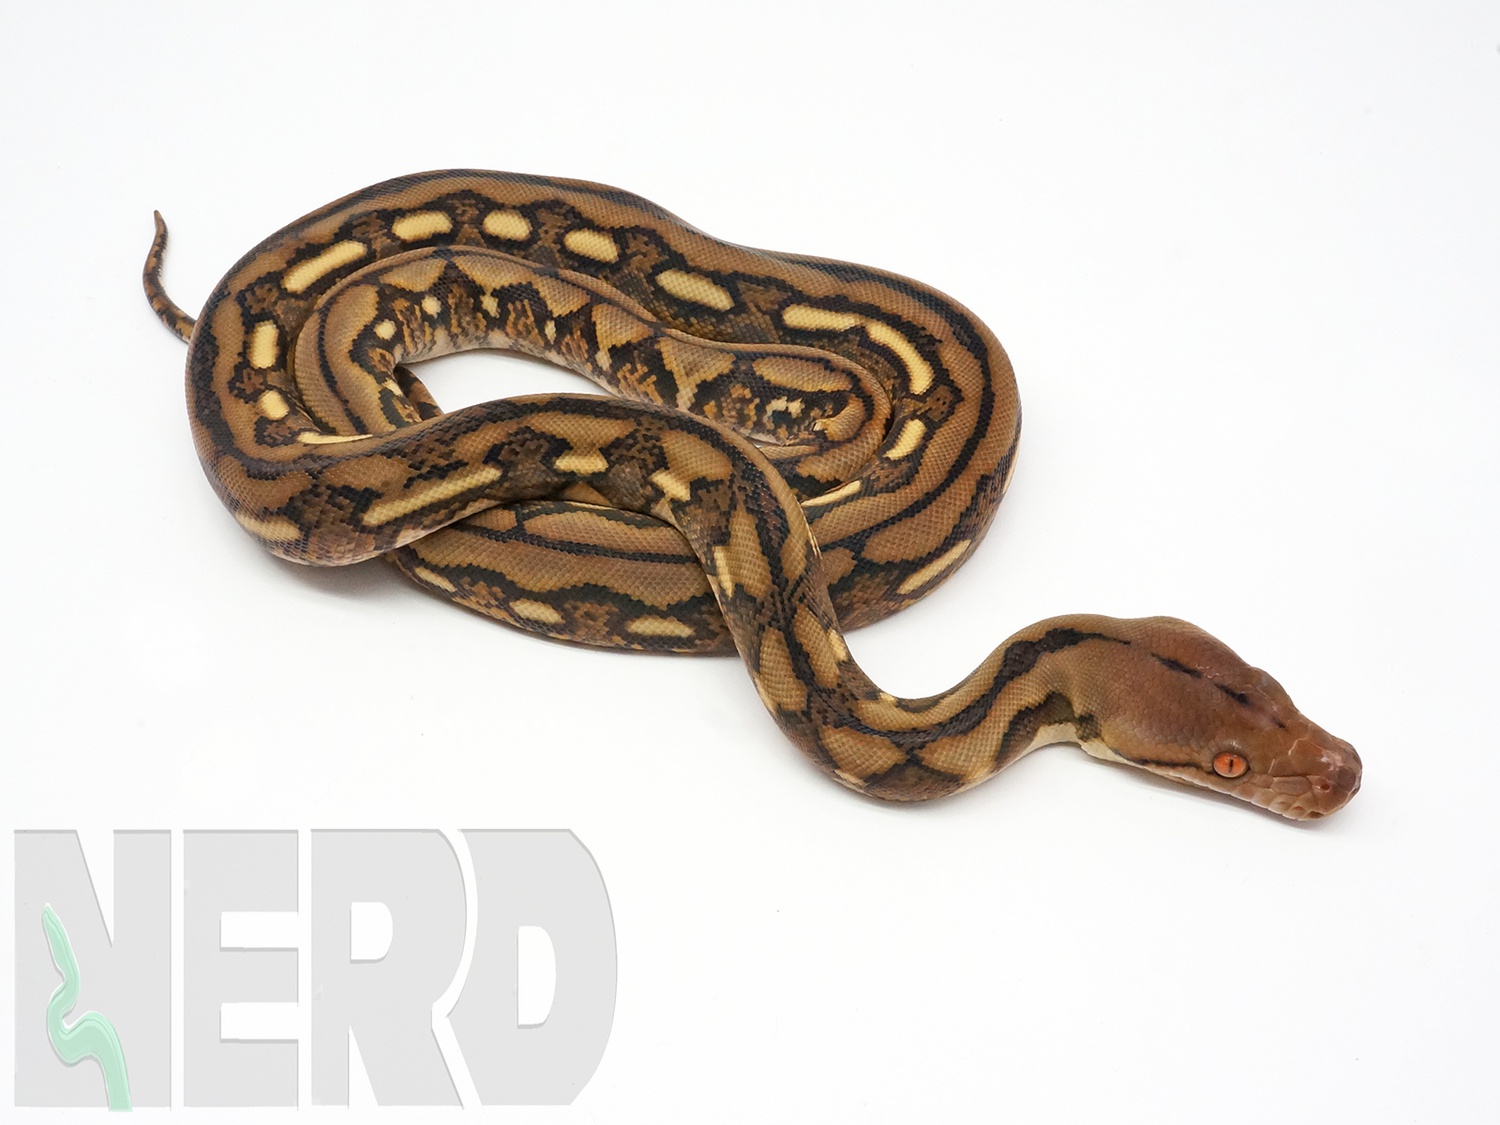 Tiger Reticulated Python by New England Reptile Distributors